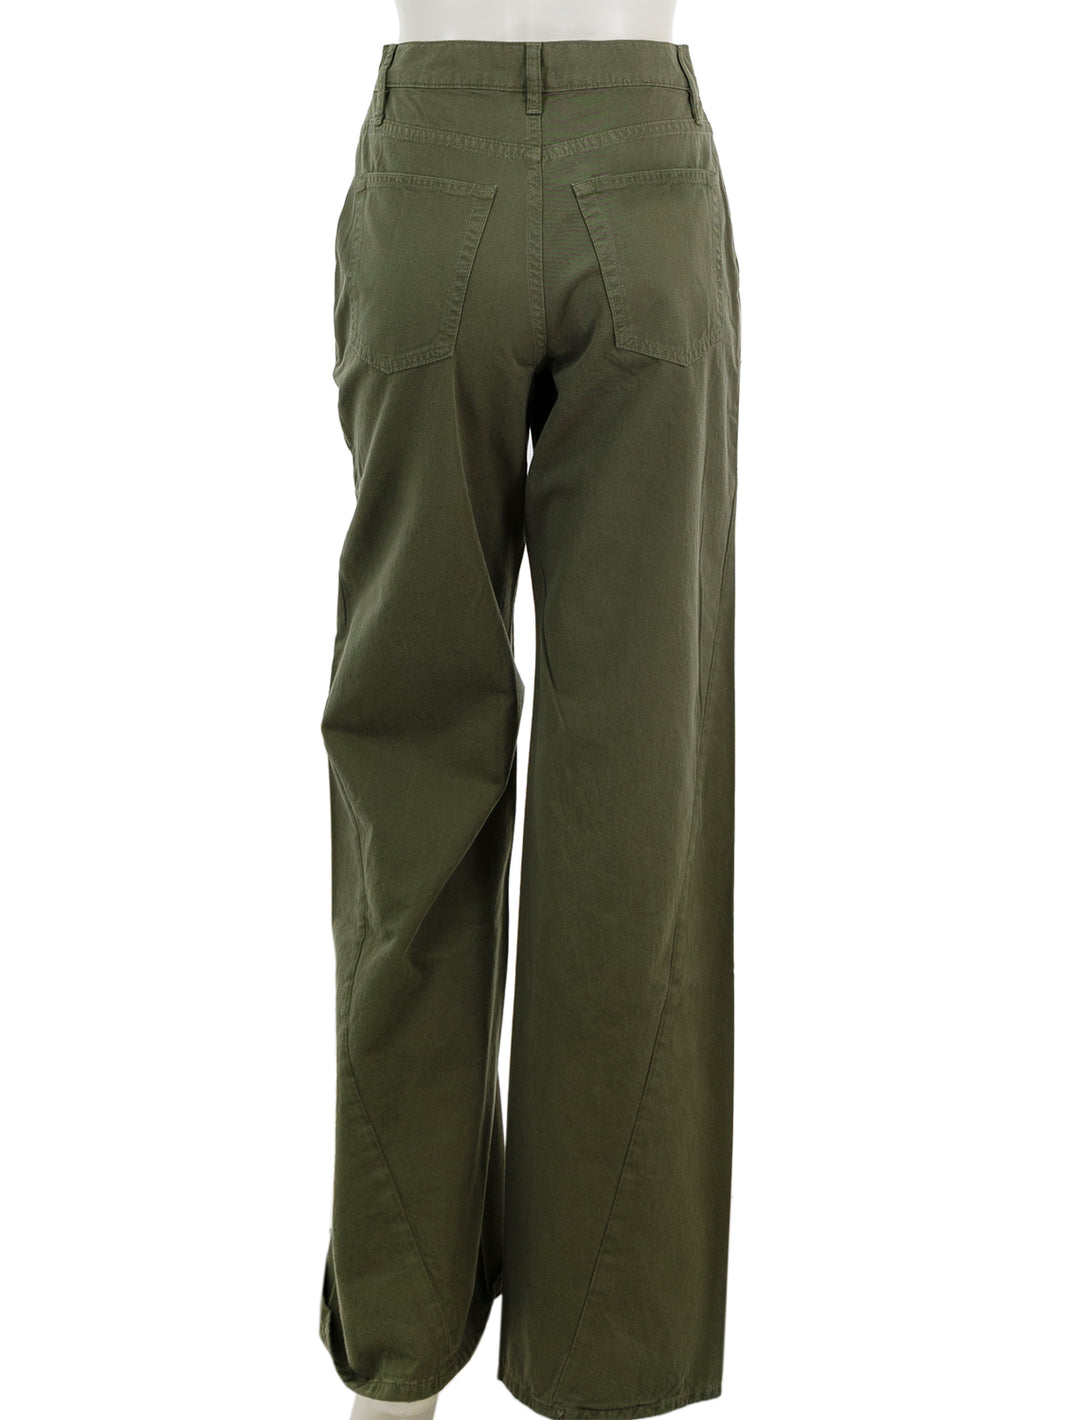 Back view of Anine Bing's briley pant in army green.